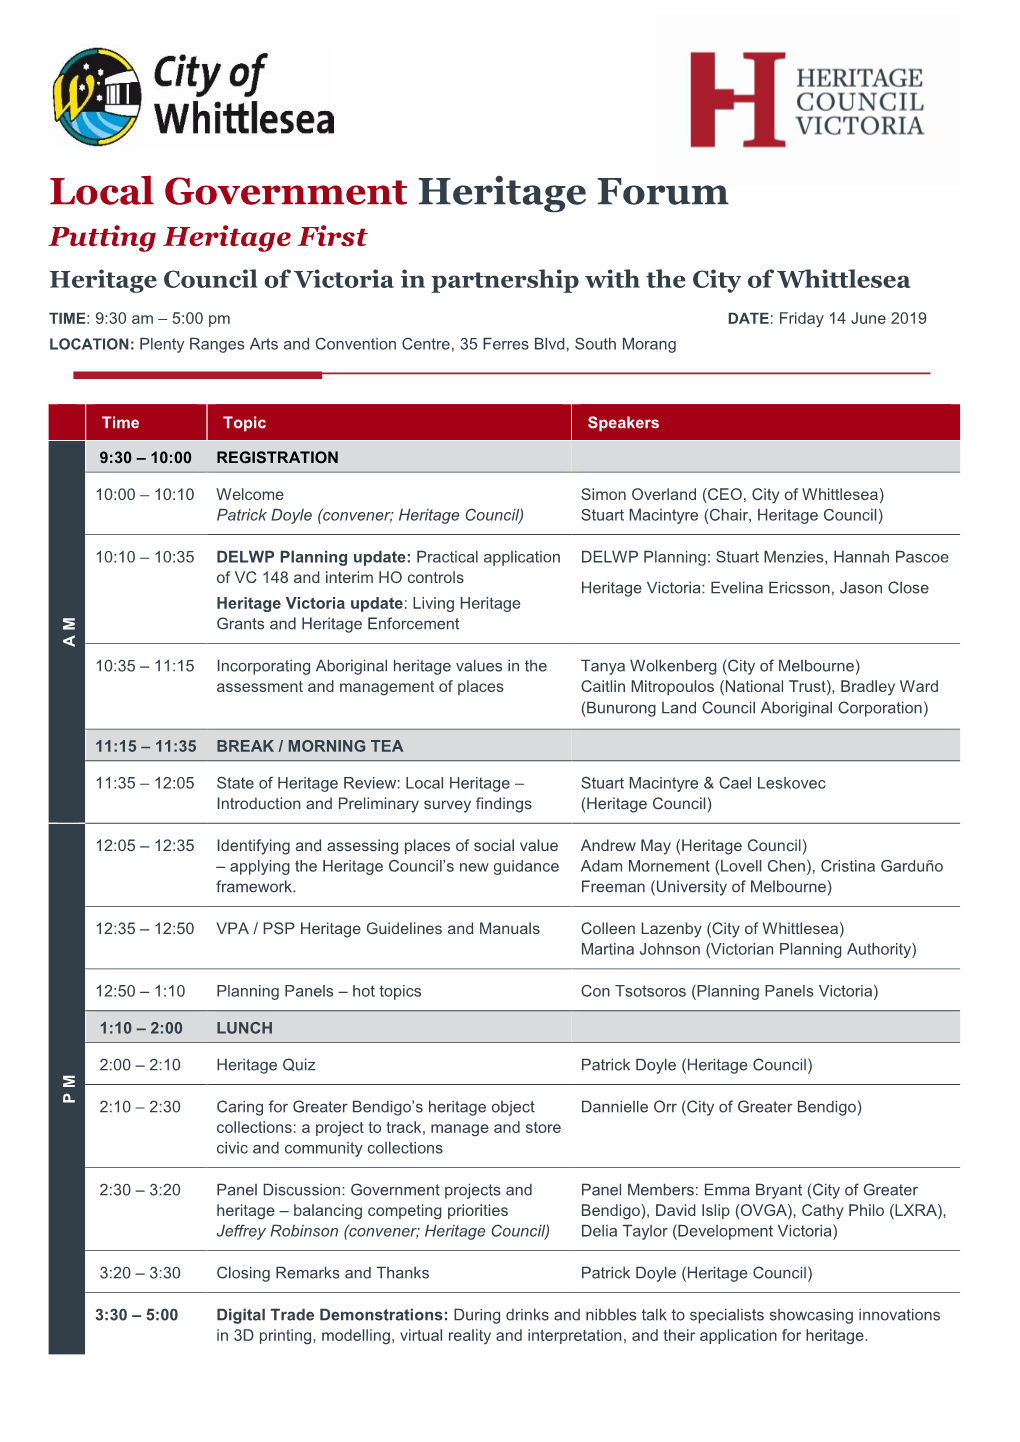 Local Government Heritage Forum Putting Heritage First Heritage Council of Victoria in Partnership with the City of Whittlesea